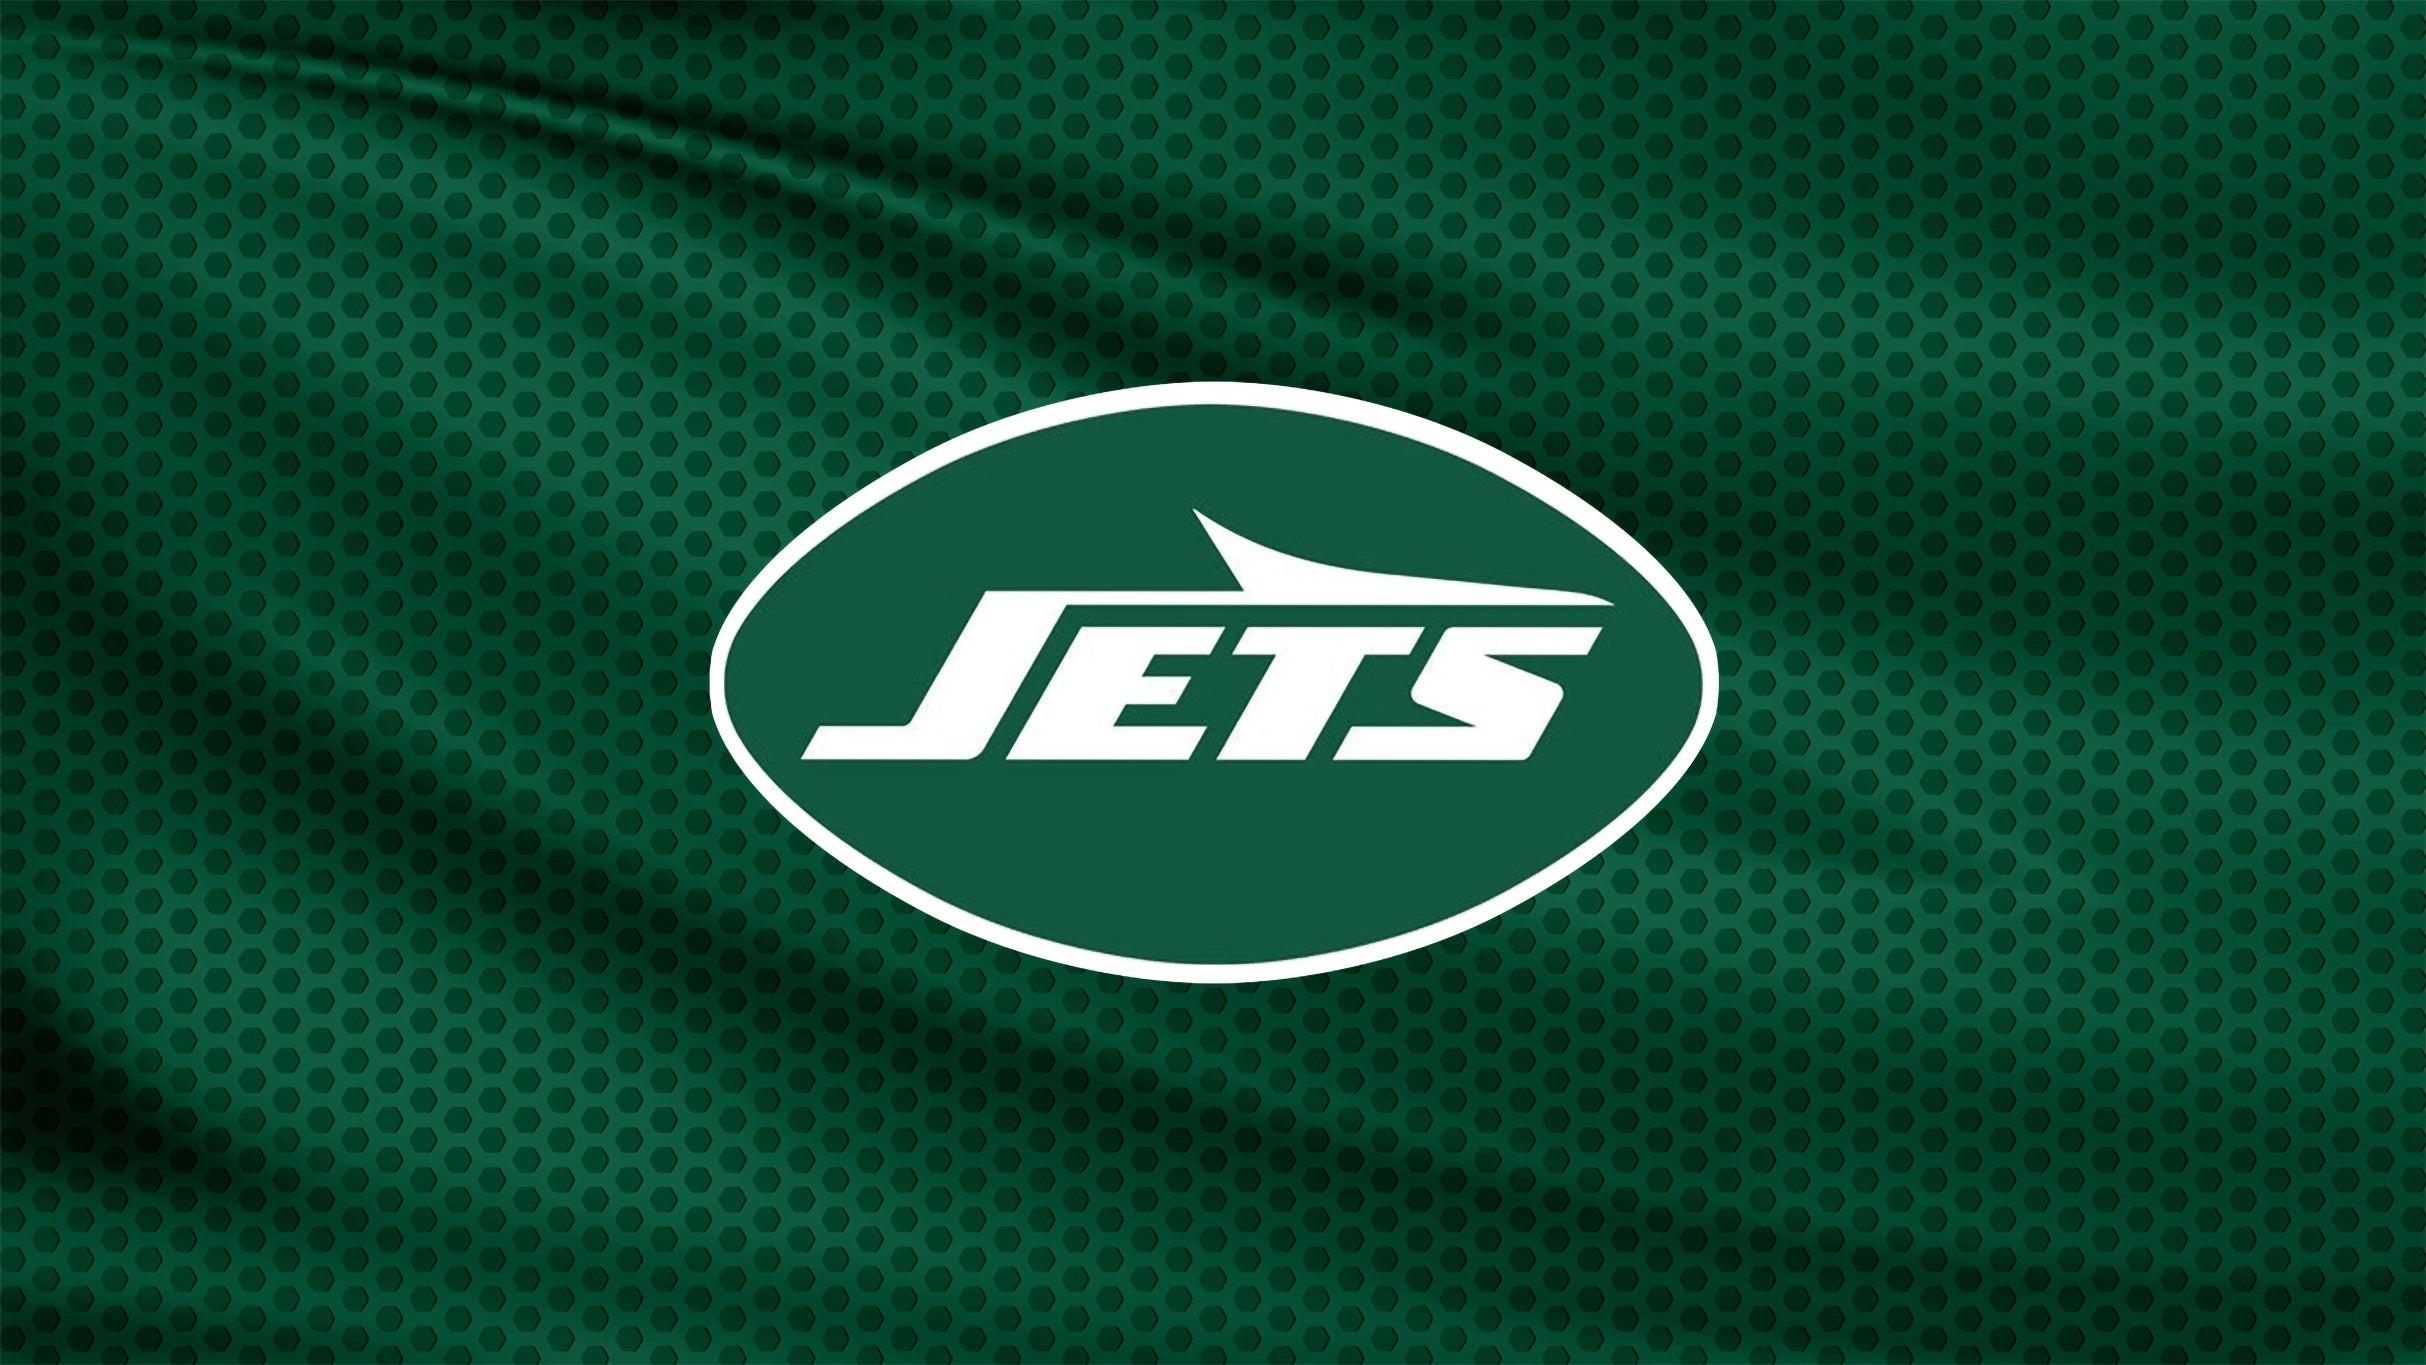 New York Jets vs. Miami Dolphins in East Rutherford promo photo for VISA presale offer code